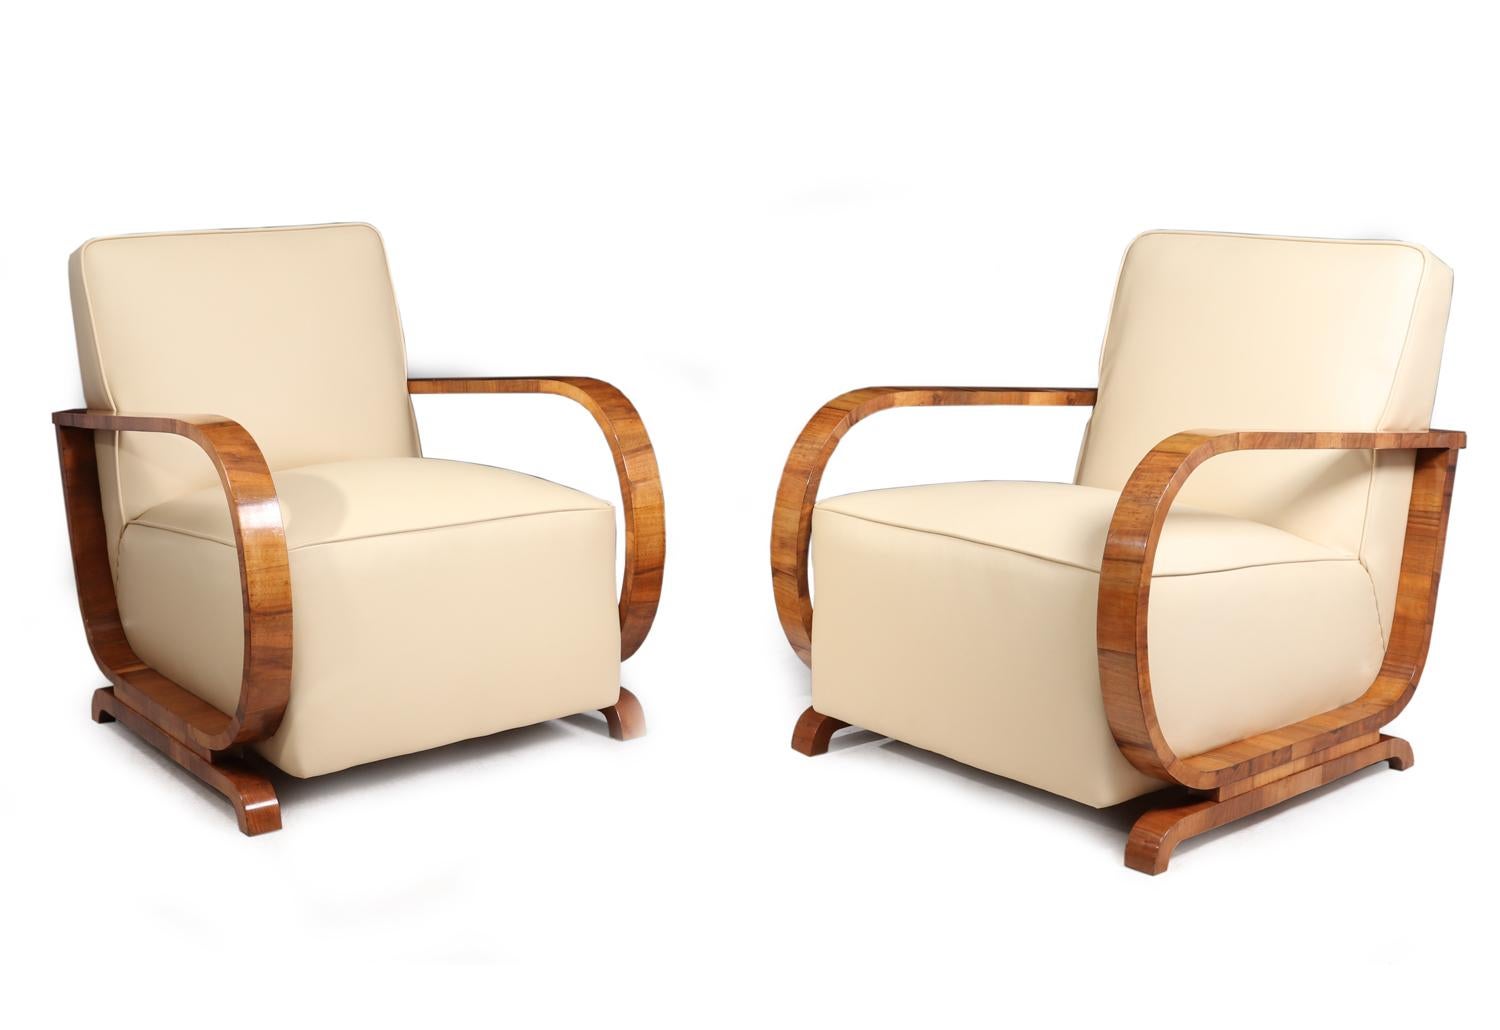 Art Deco walnut and leather armchairs, circa 1930
A pair of Art deco Leather and walnut framed armchairs, fully upholstered and covered in top grade cream leather hyde with piped detail, the walnut arms have been fully hand polished, the chairs are